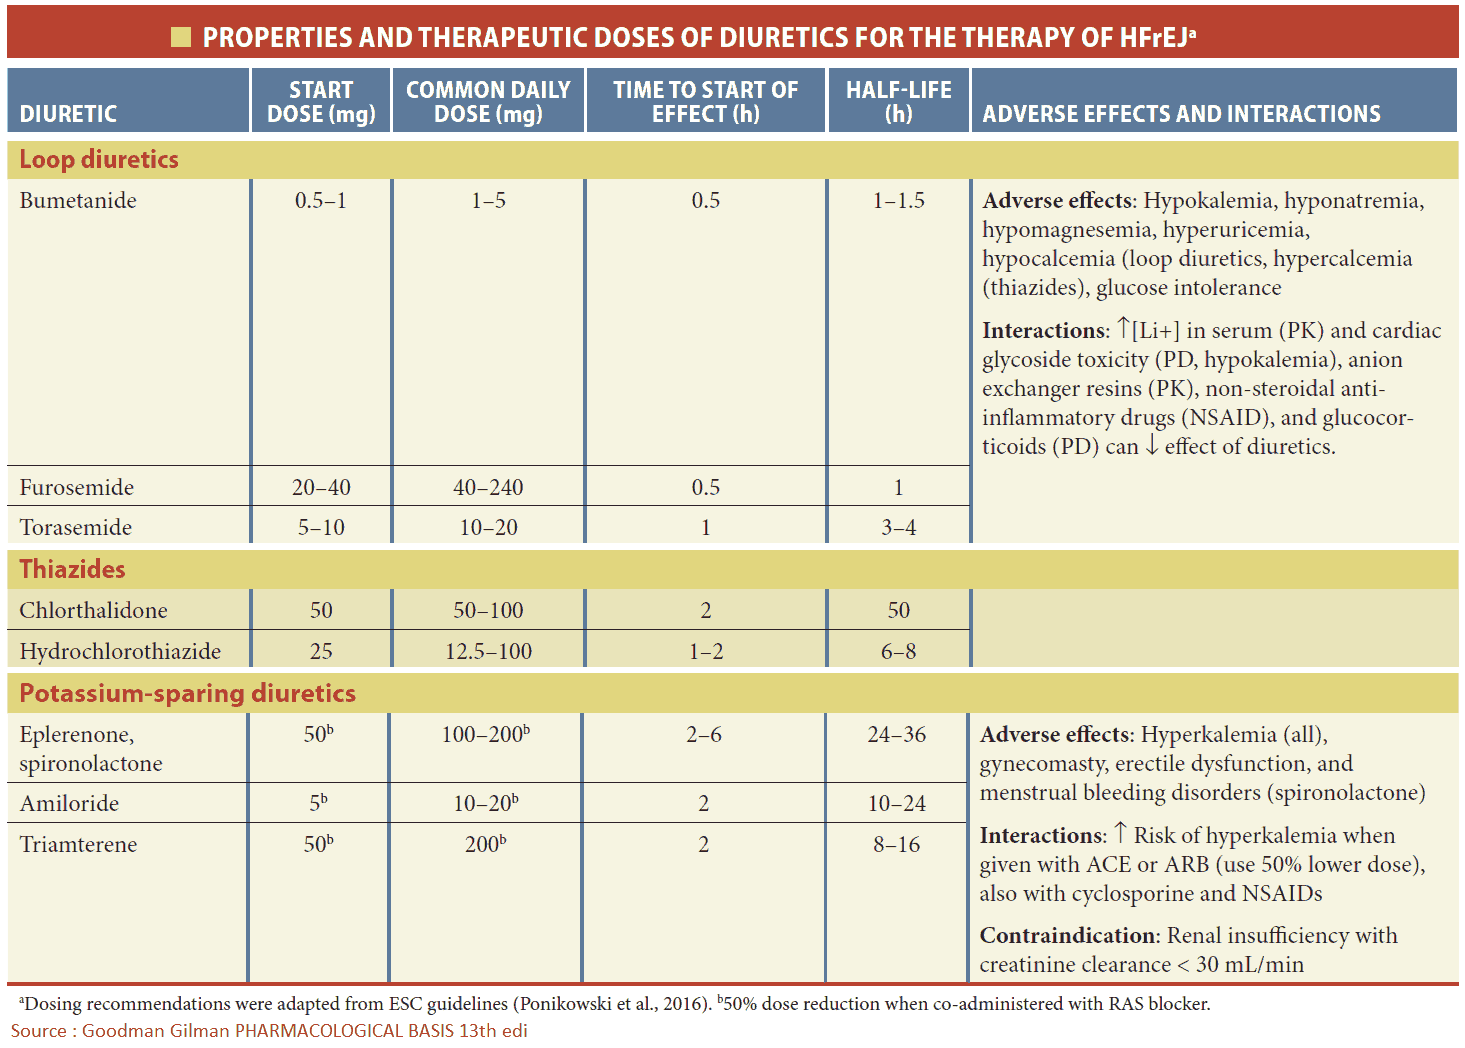 Properties and Therapeutic Doses of Diuretics for the Therapy of HFrEF (Heart Failure with Reduced Ejection Fraction)